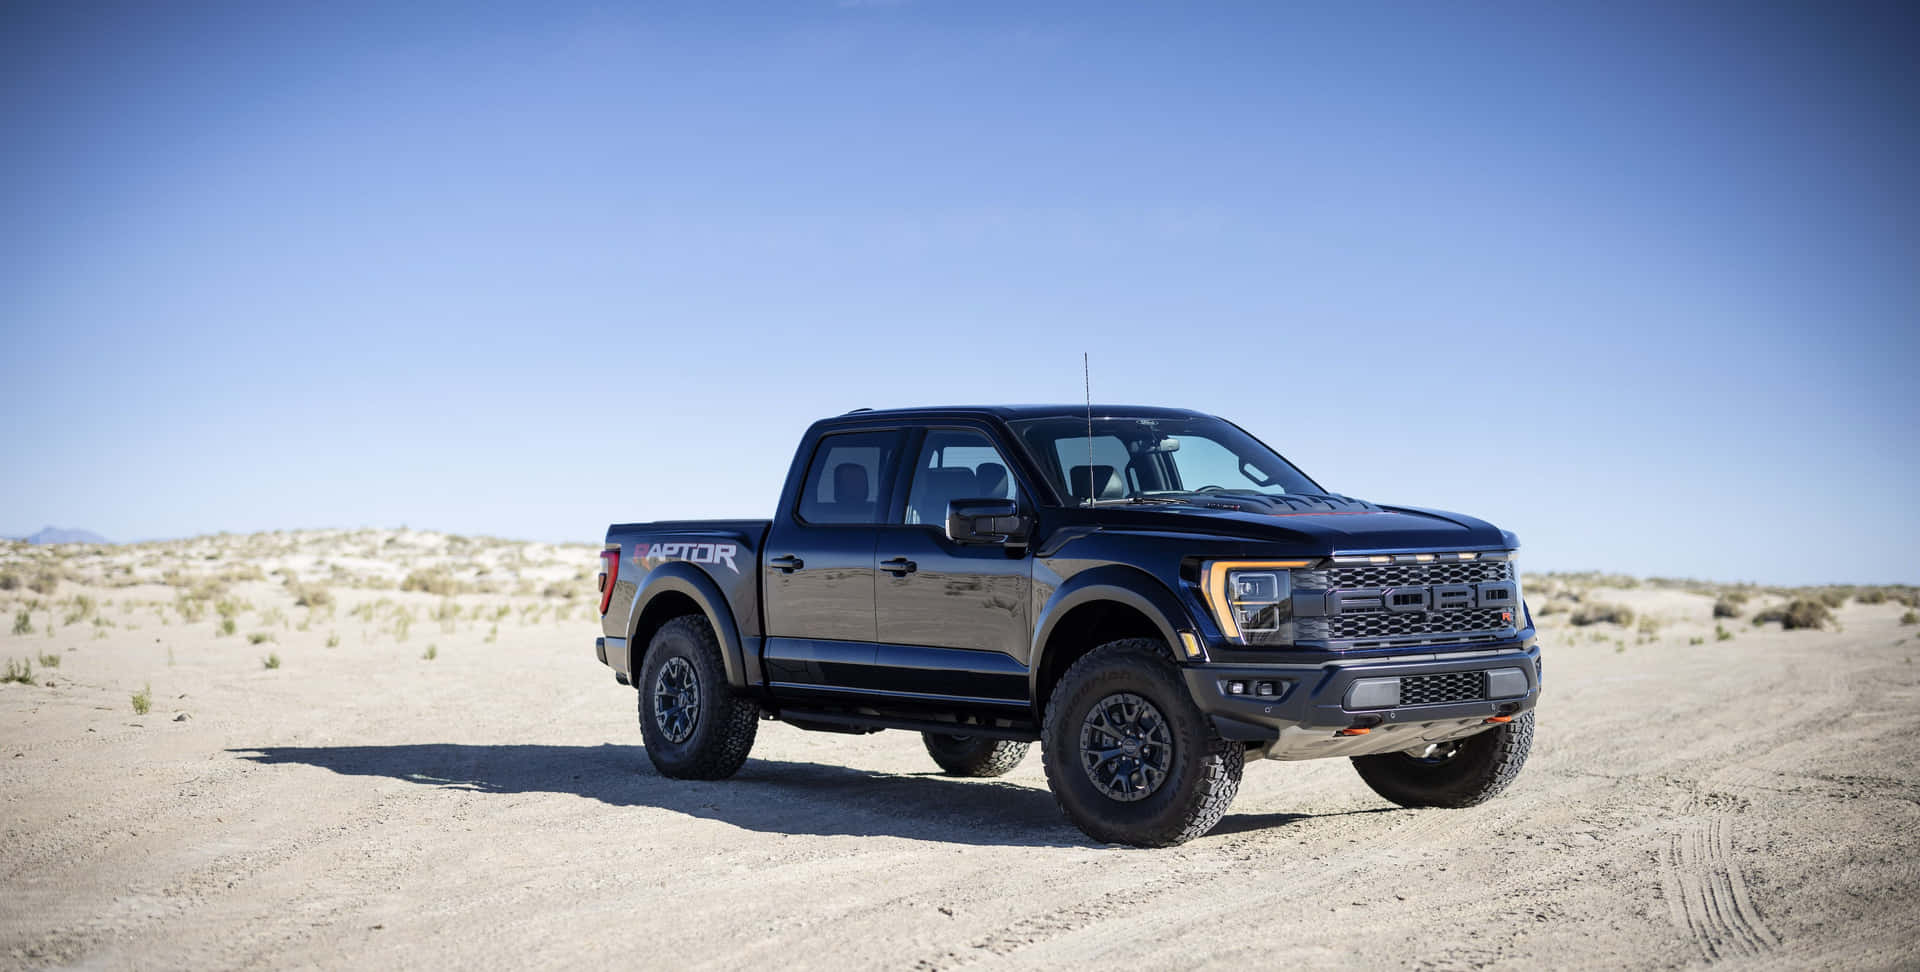 The Black Ford F - 150 Rk Cab Is Parked In The Desert Wallpaper